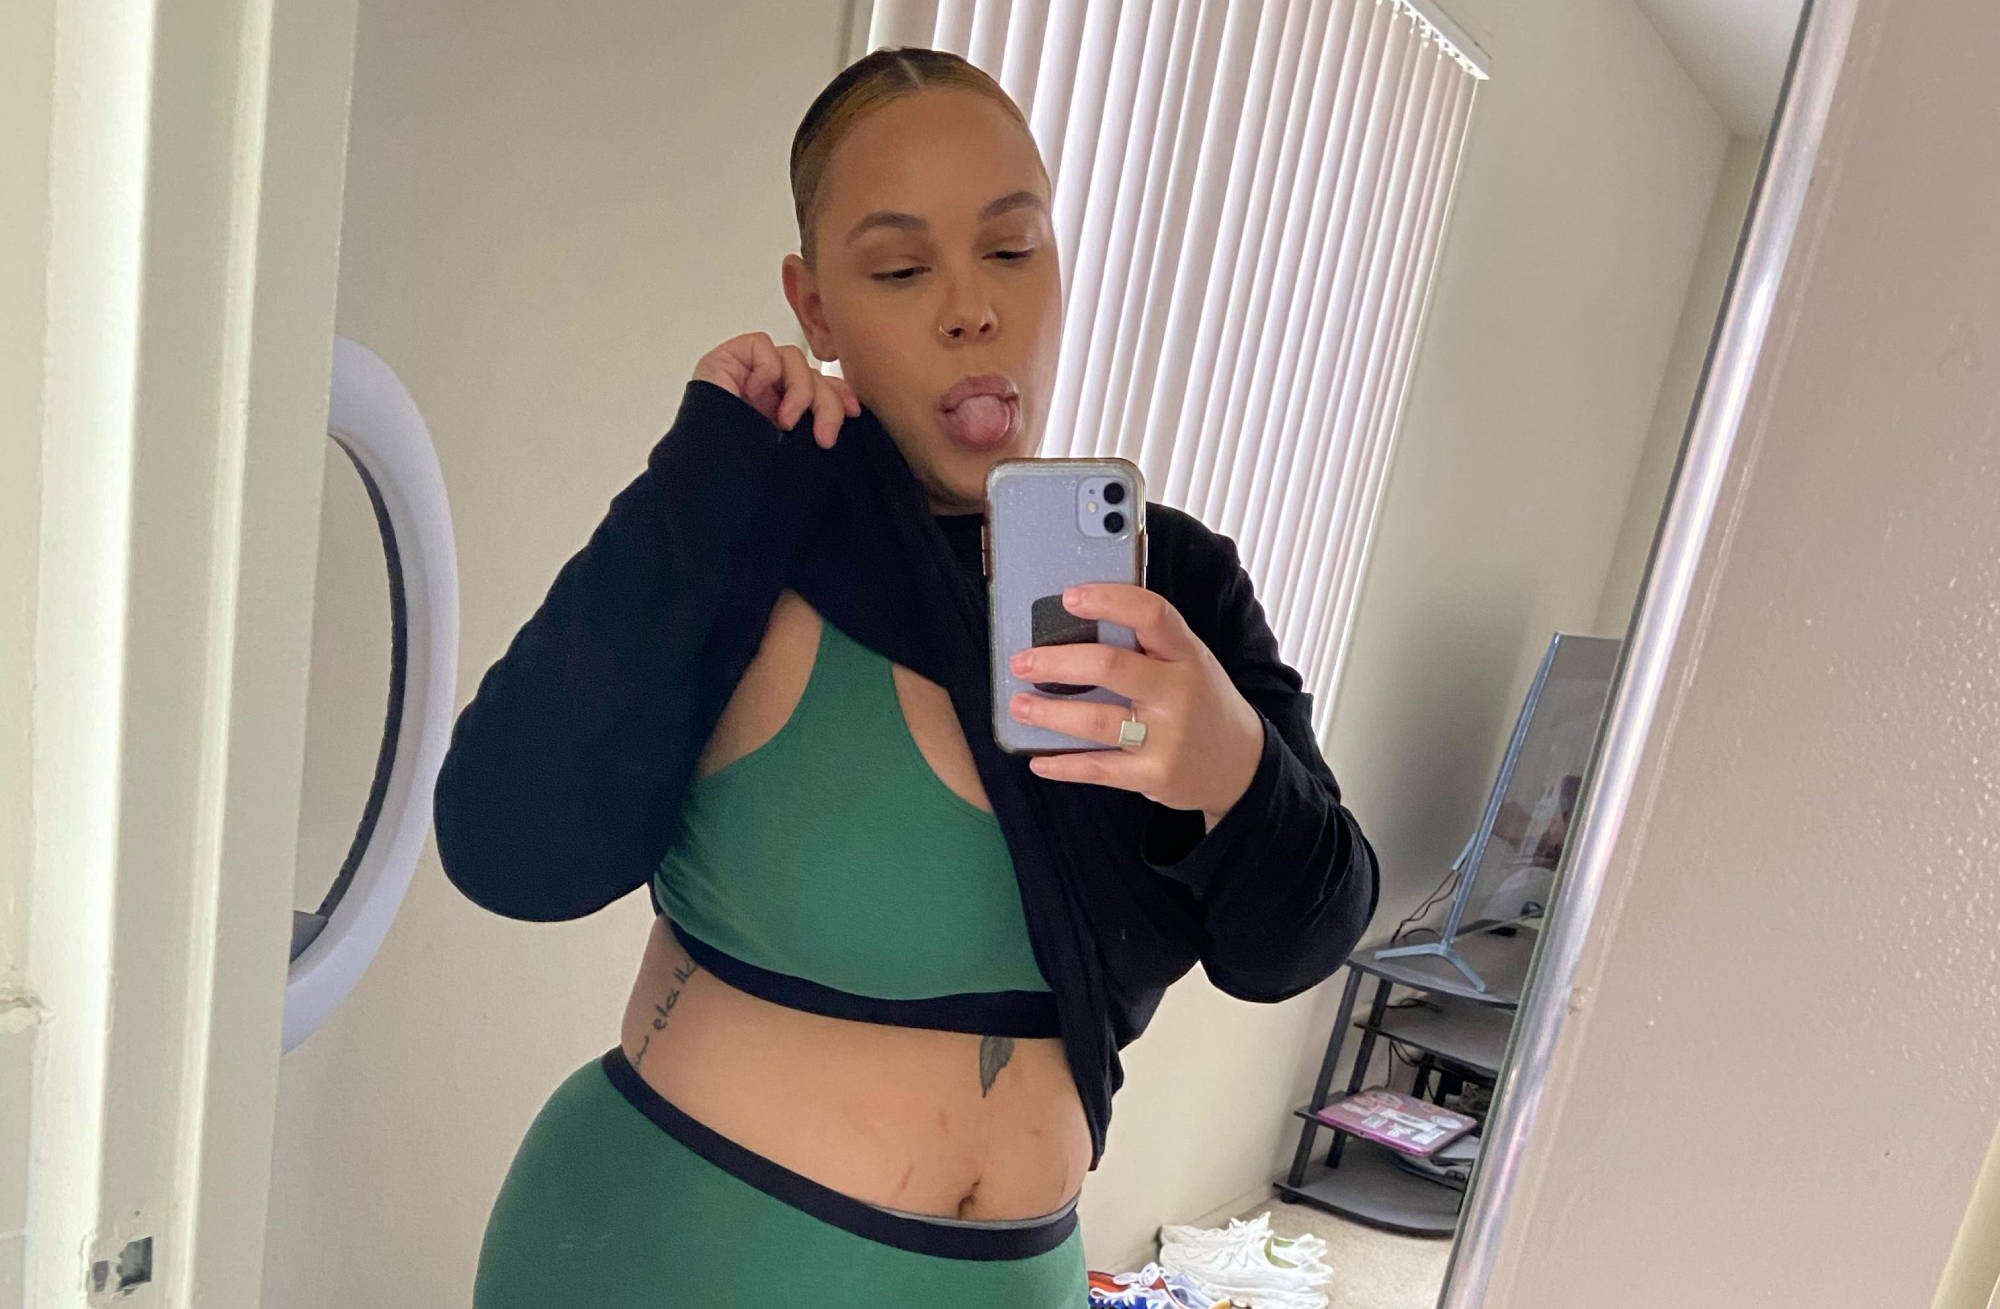 A woman pulls up her black sweater to expose her green bralette while she takes a mirror selfie with her tongue sticking out.